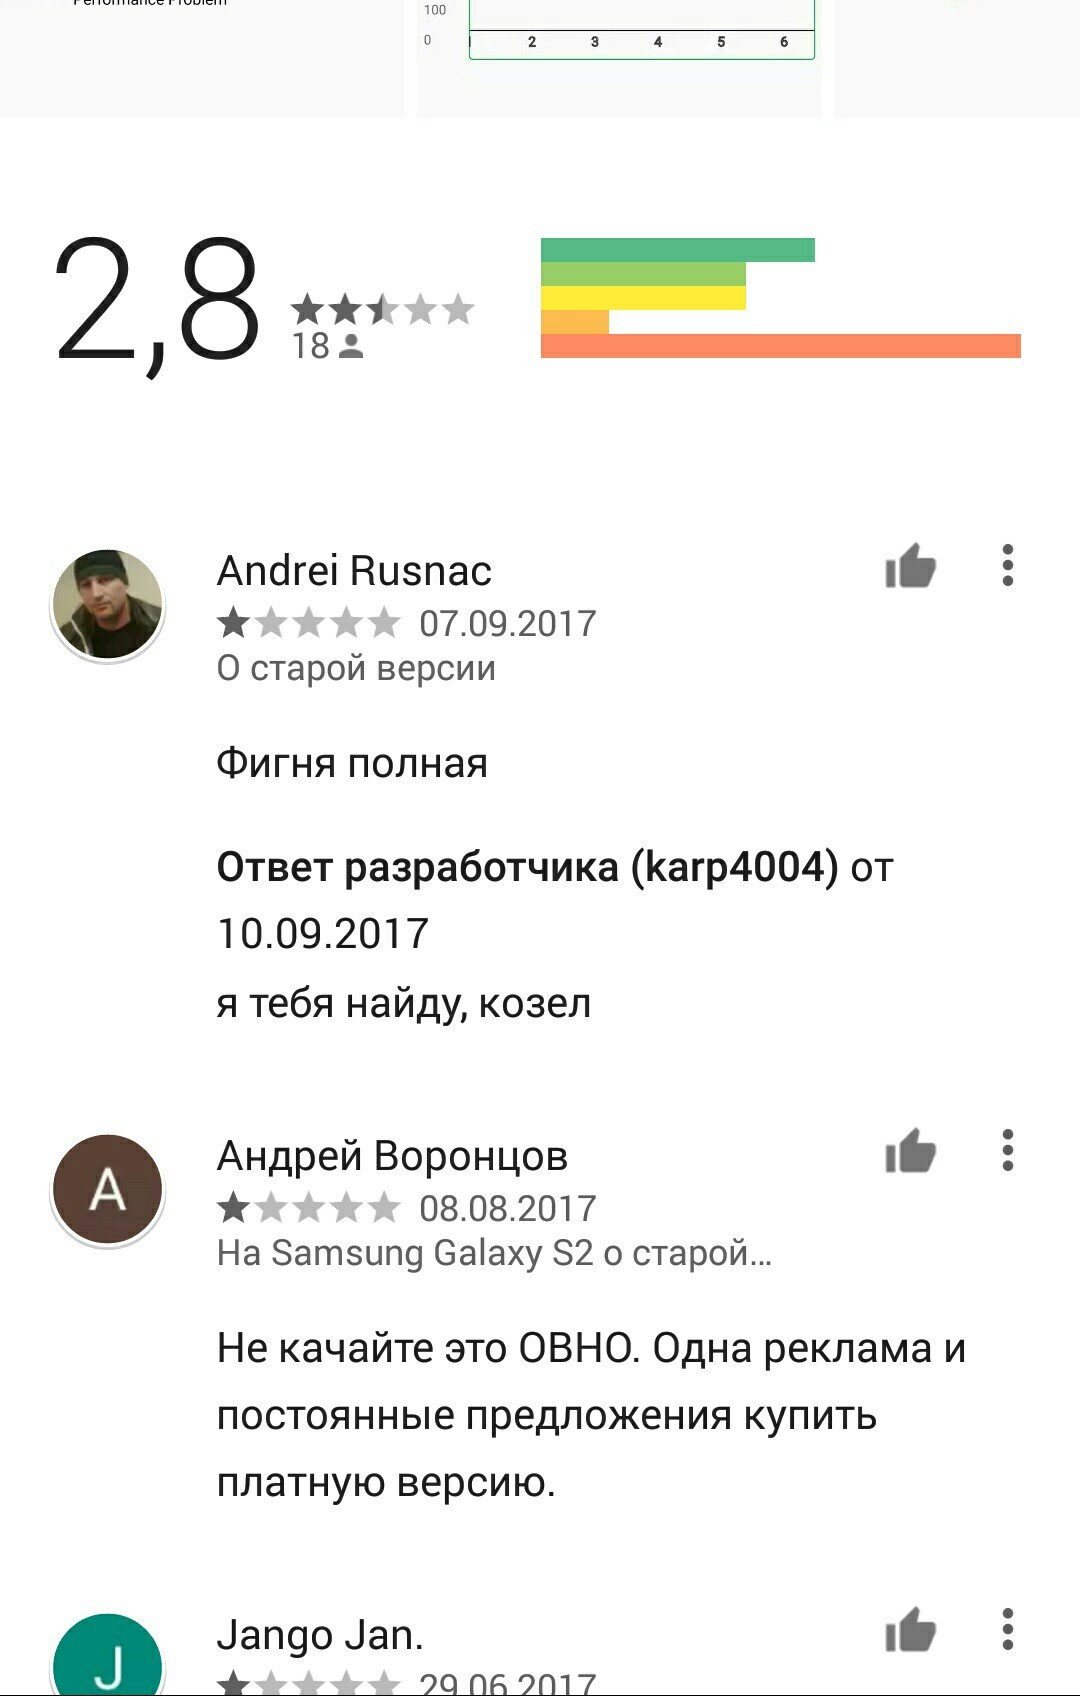 Description for one application in Google Play - Android app, Description, Review